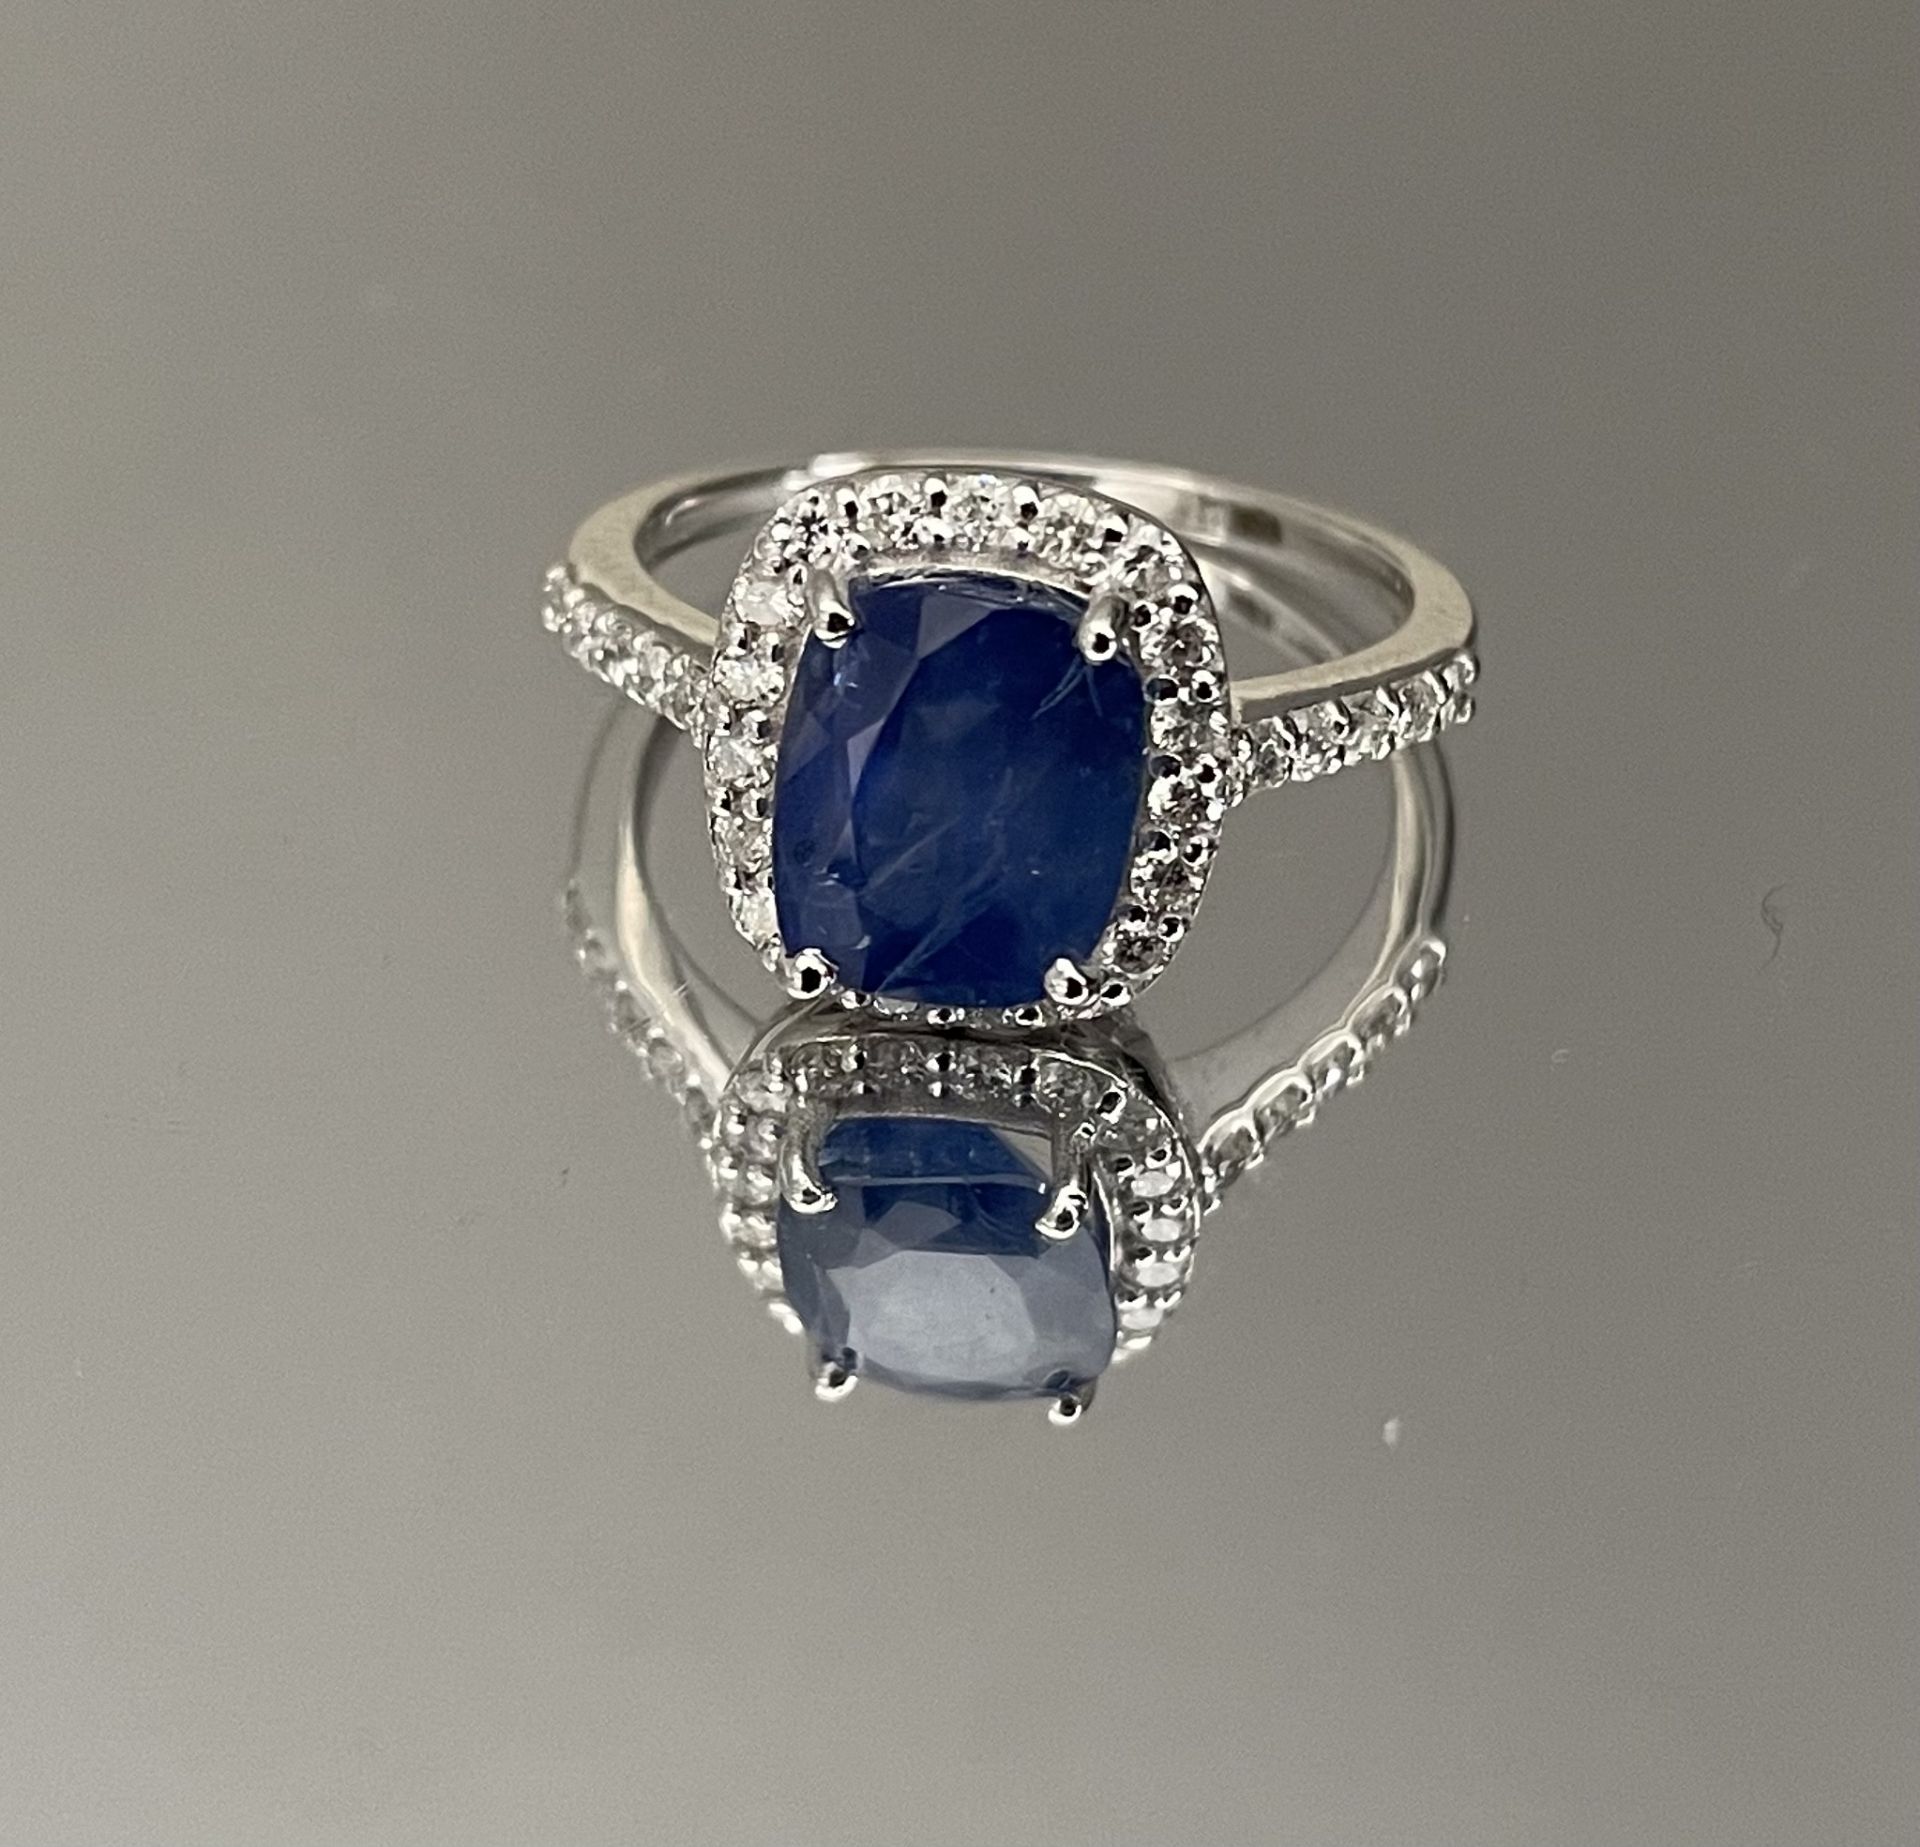 Beautiful Natural Ceylon Blue Sapphire With Natural Diamonds And 18k White Gold - Image 5 of 6